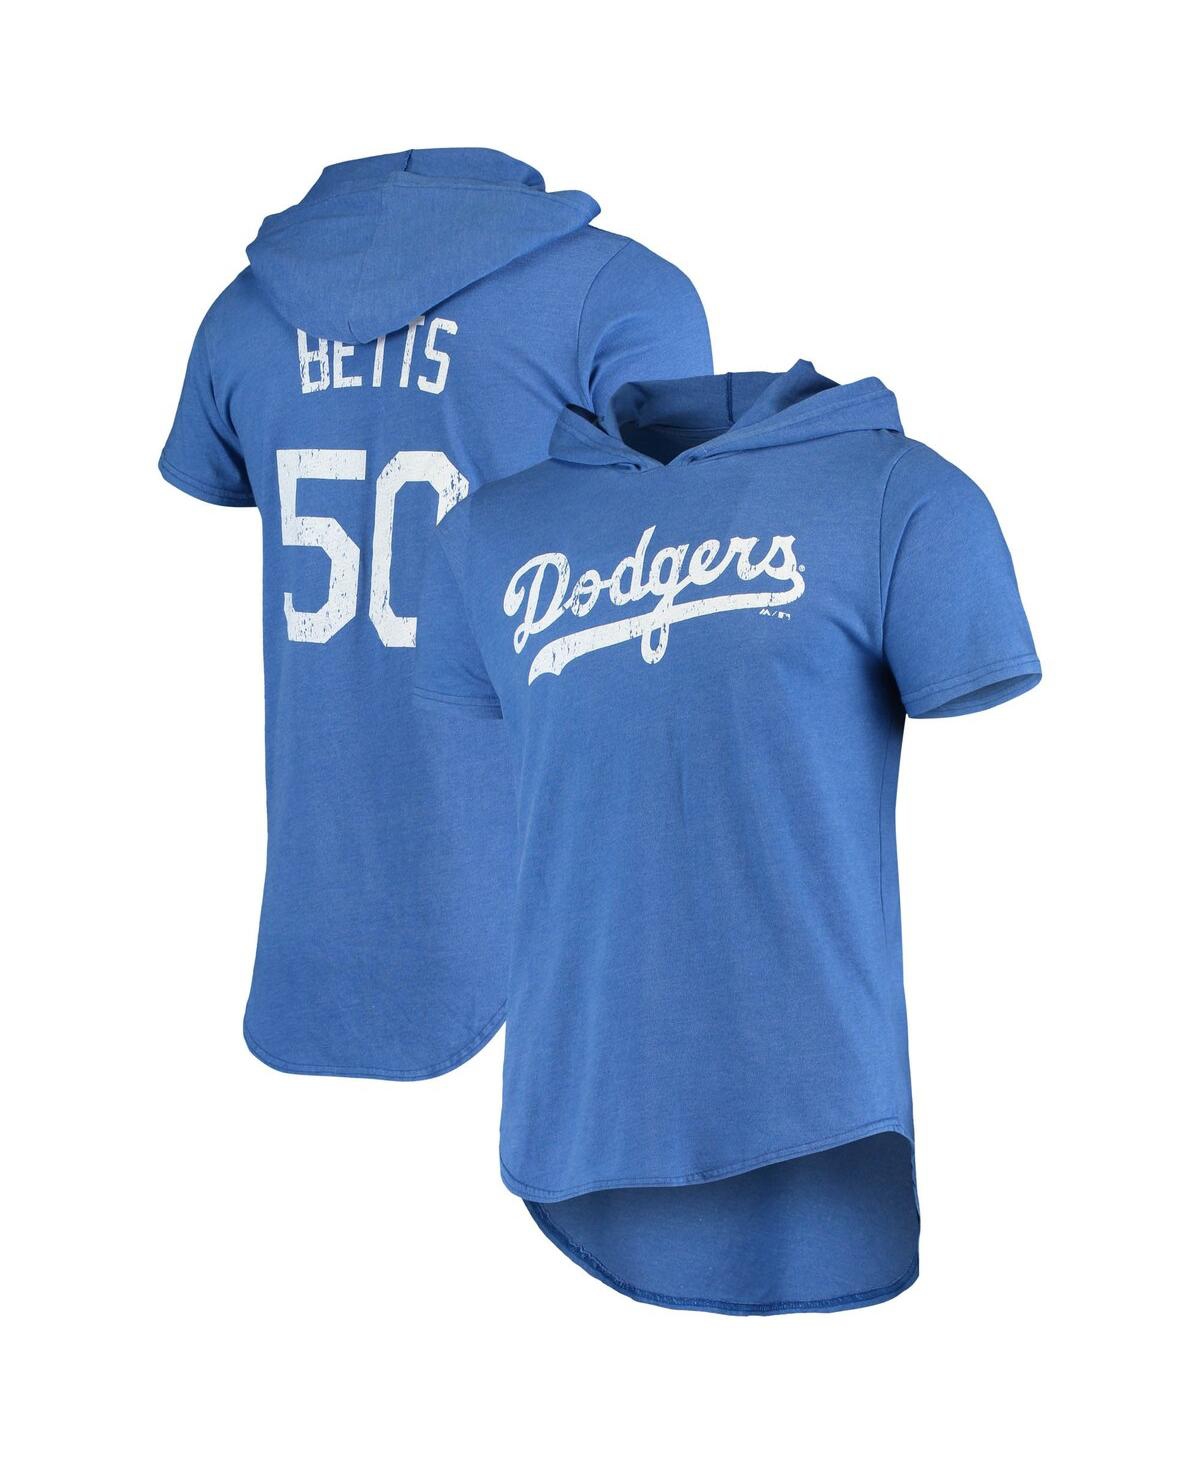 Men's Mookie Betts Royal Los Angeles Dodgers Softhand Player Hoodie T-shirt - Royal